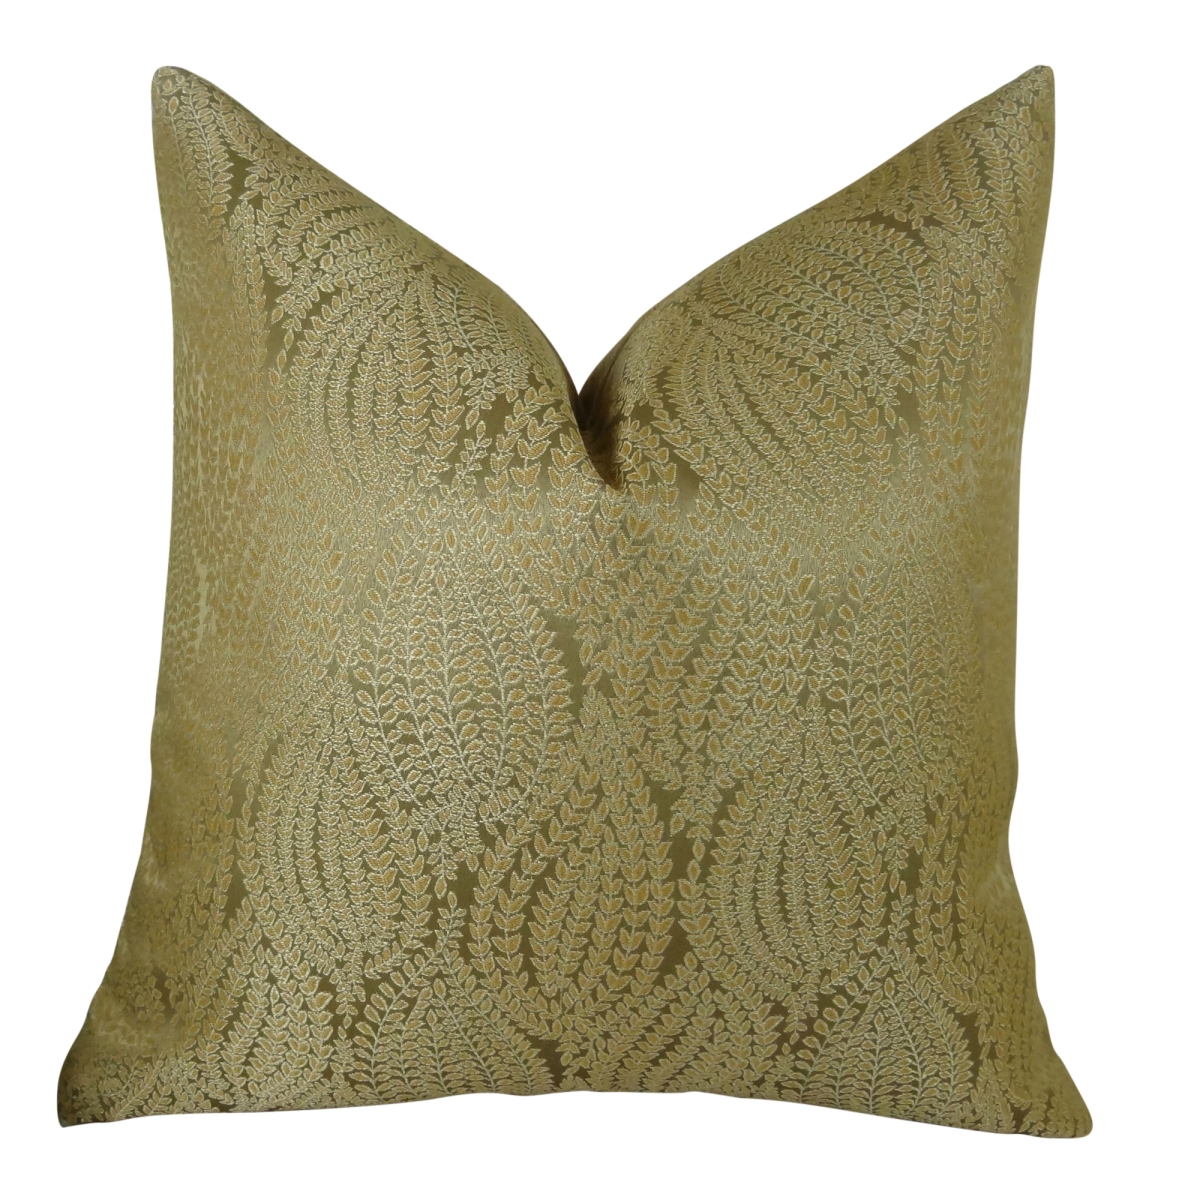 Pb11015-2030-dp 20 X 30 In. Double Sided Queen Size Leaf Pod Handmade Throw Pillow - Gold